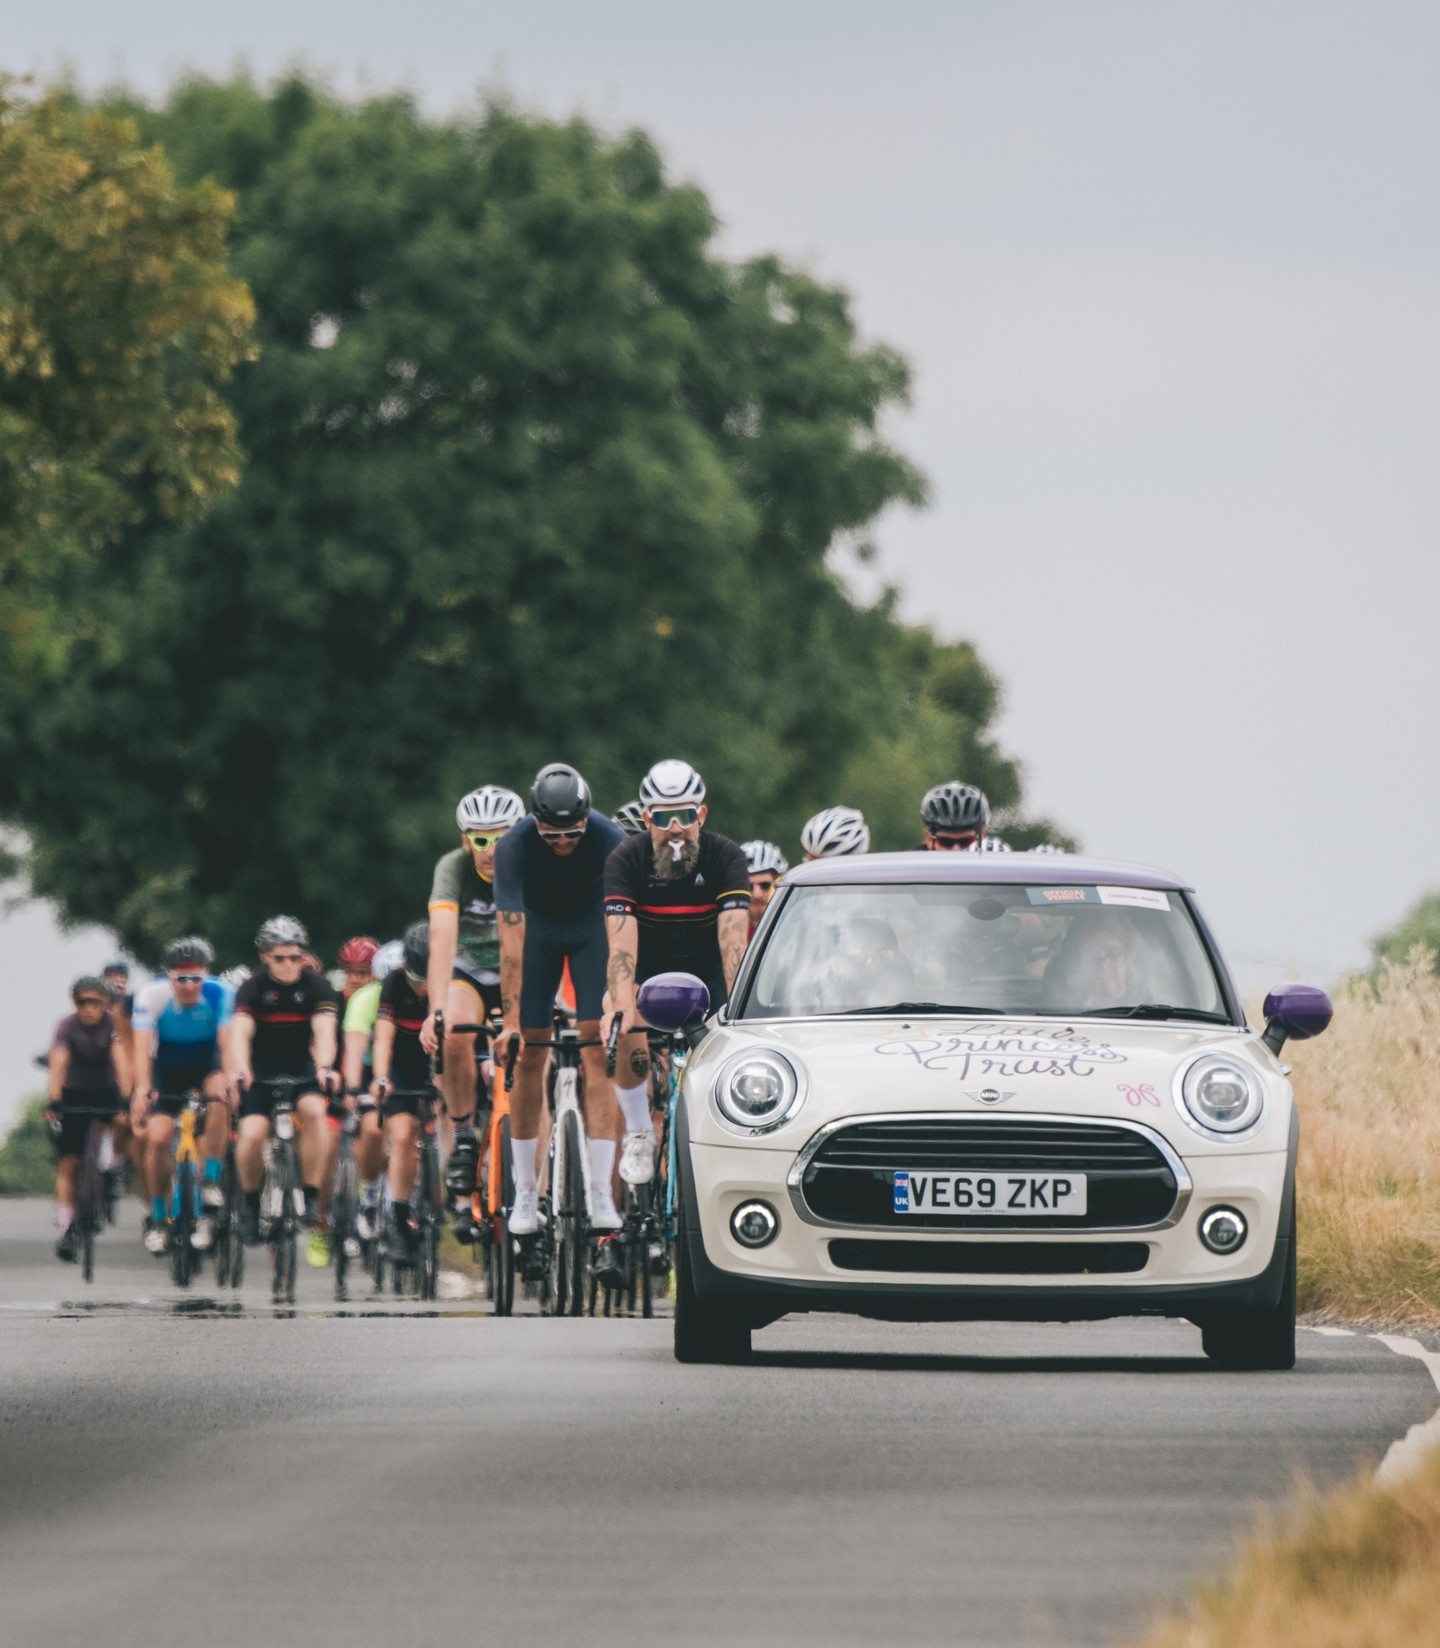 The Little Princess Trust Mini, supported by Cotswold BMW Hereford, leads the cyclists on their way to Paris.